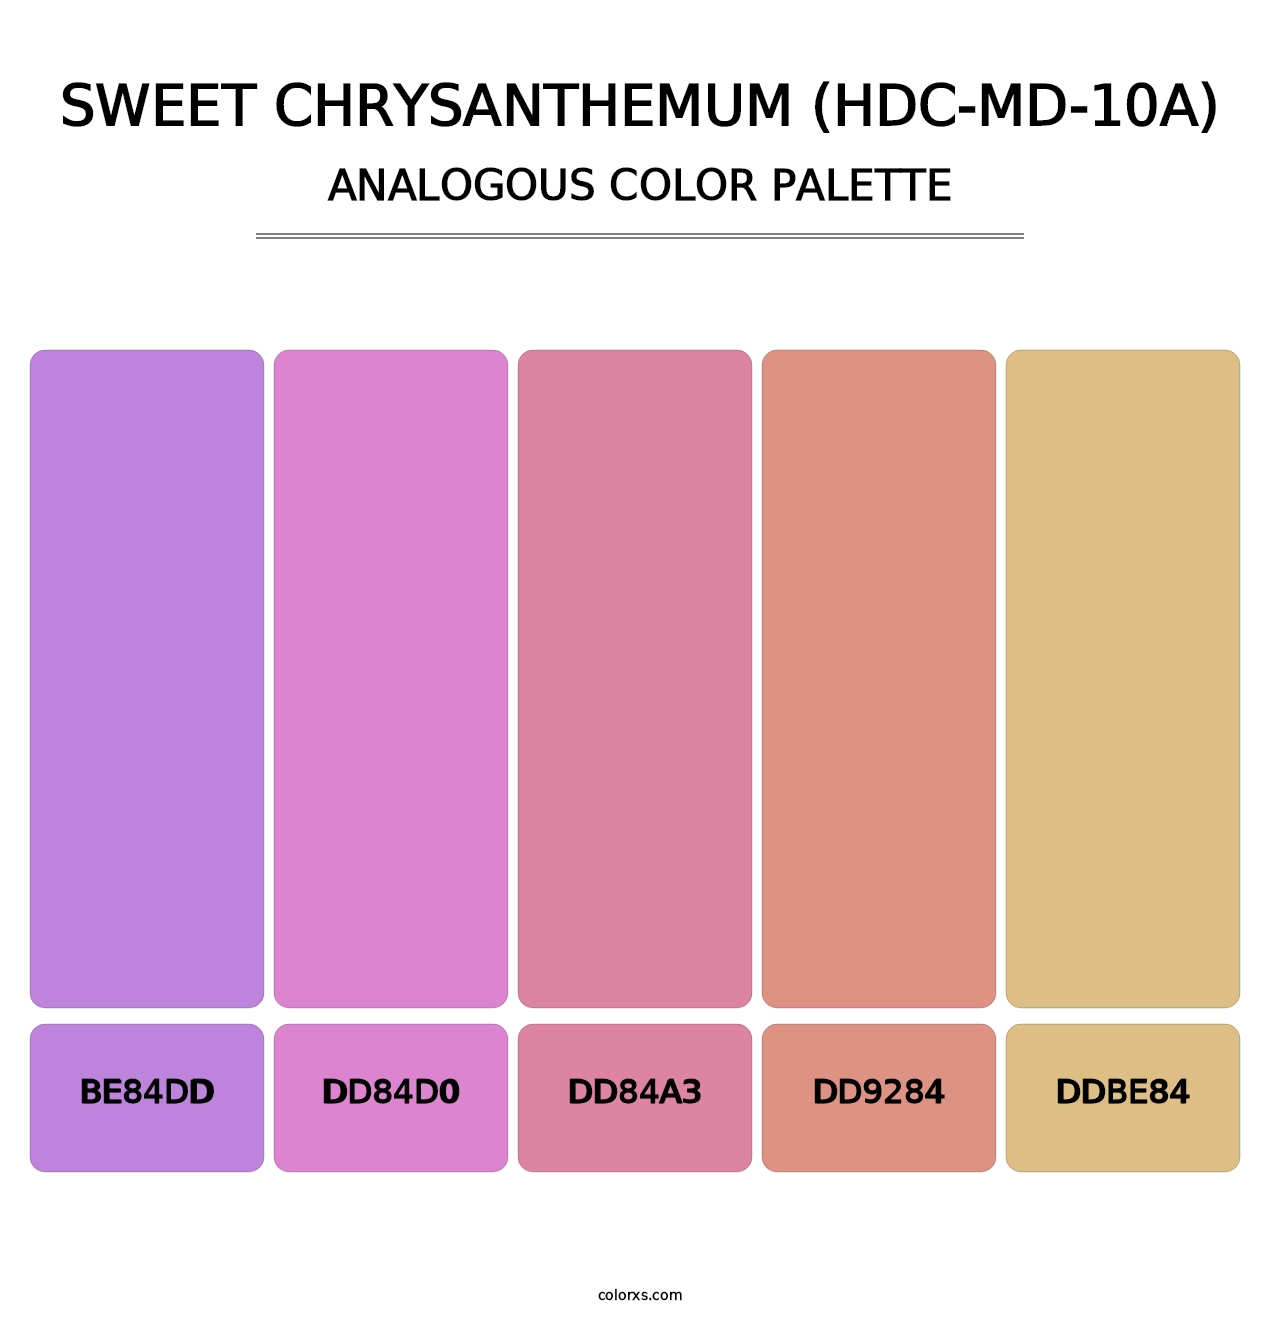 Sweet Chrysanthemum (HDC-MD-10A) - Analogous Color Palette